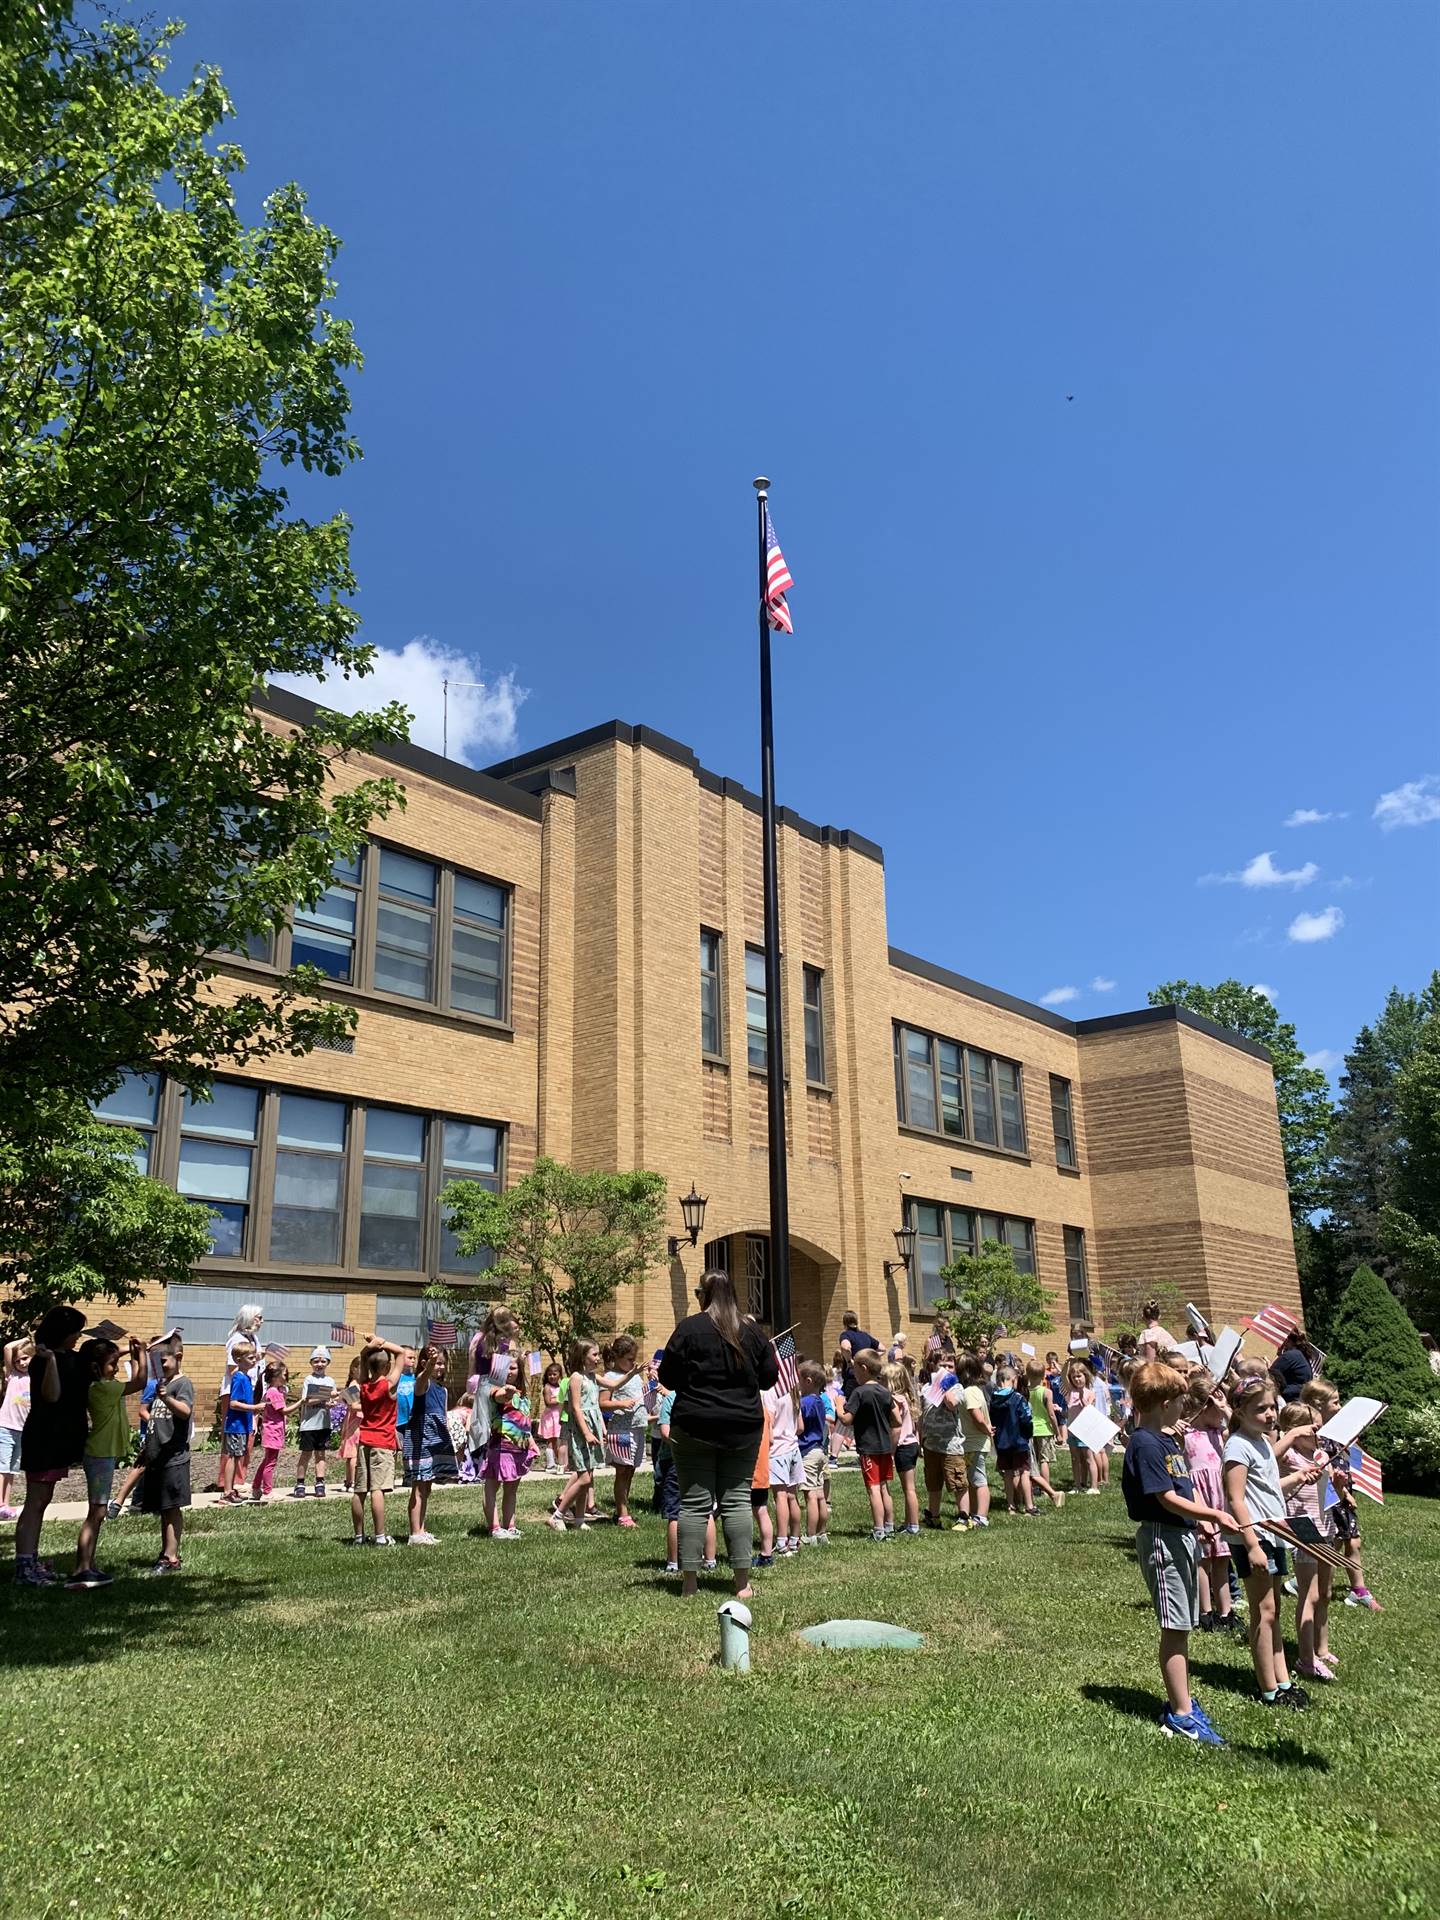 Guilford Elementary school in back ground, students watch as flag is raised